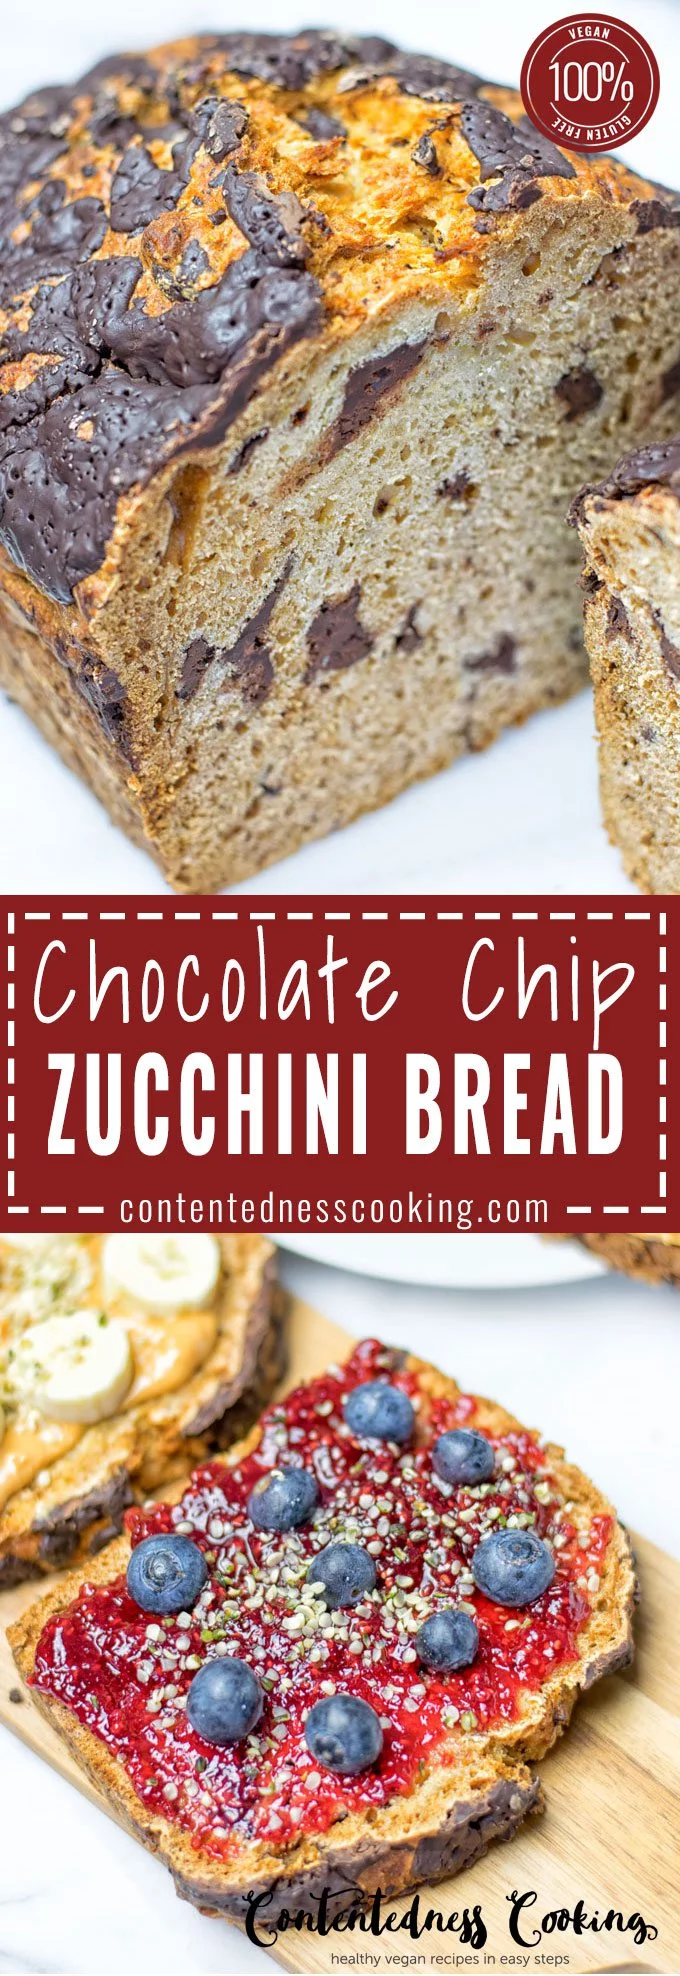 Collage of two pictures of the Chocolate Chip Zucchini Bread with recipe title text.